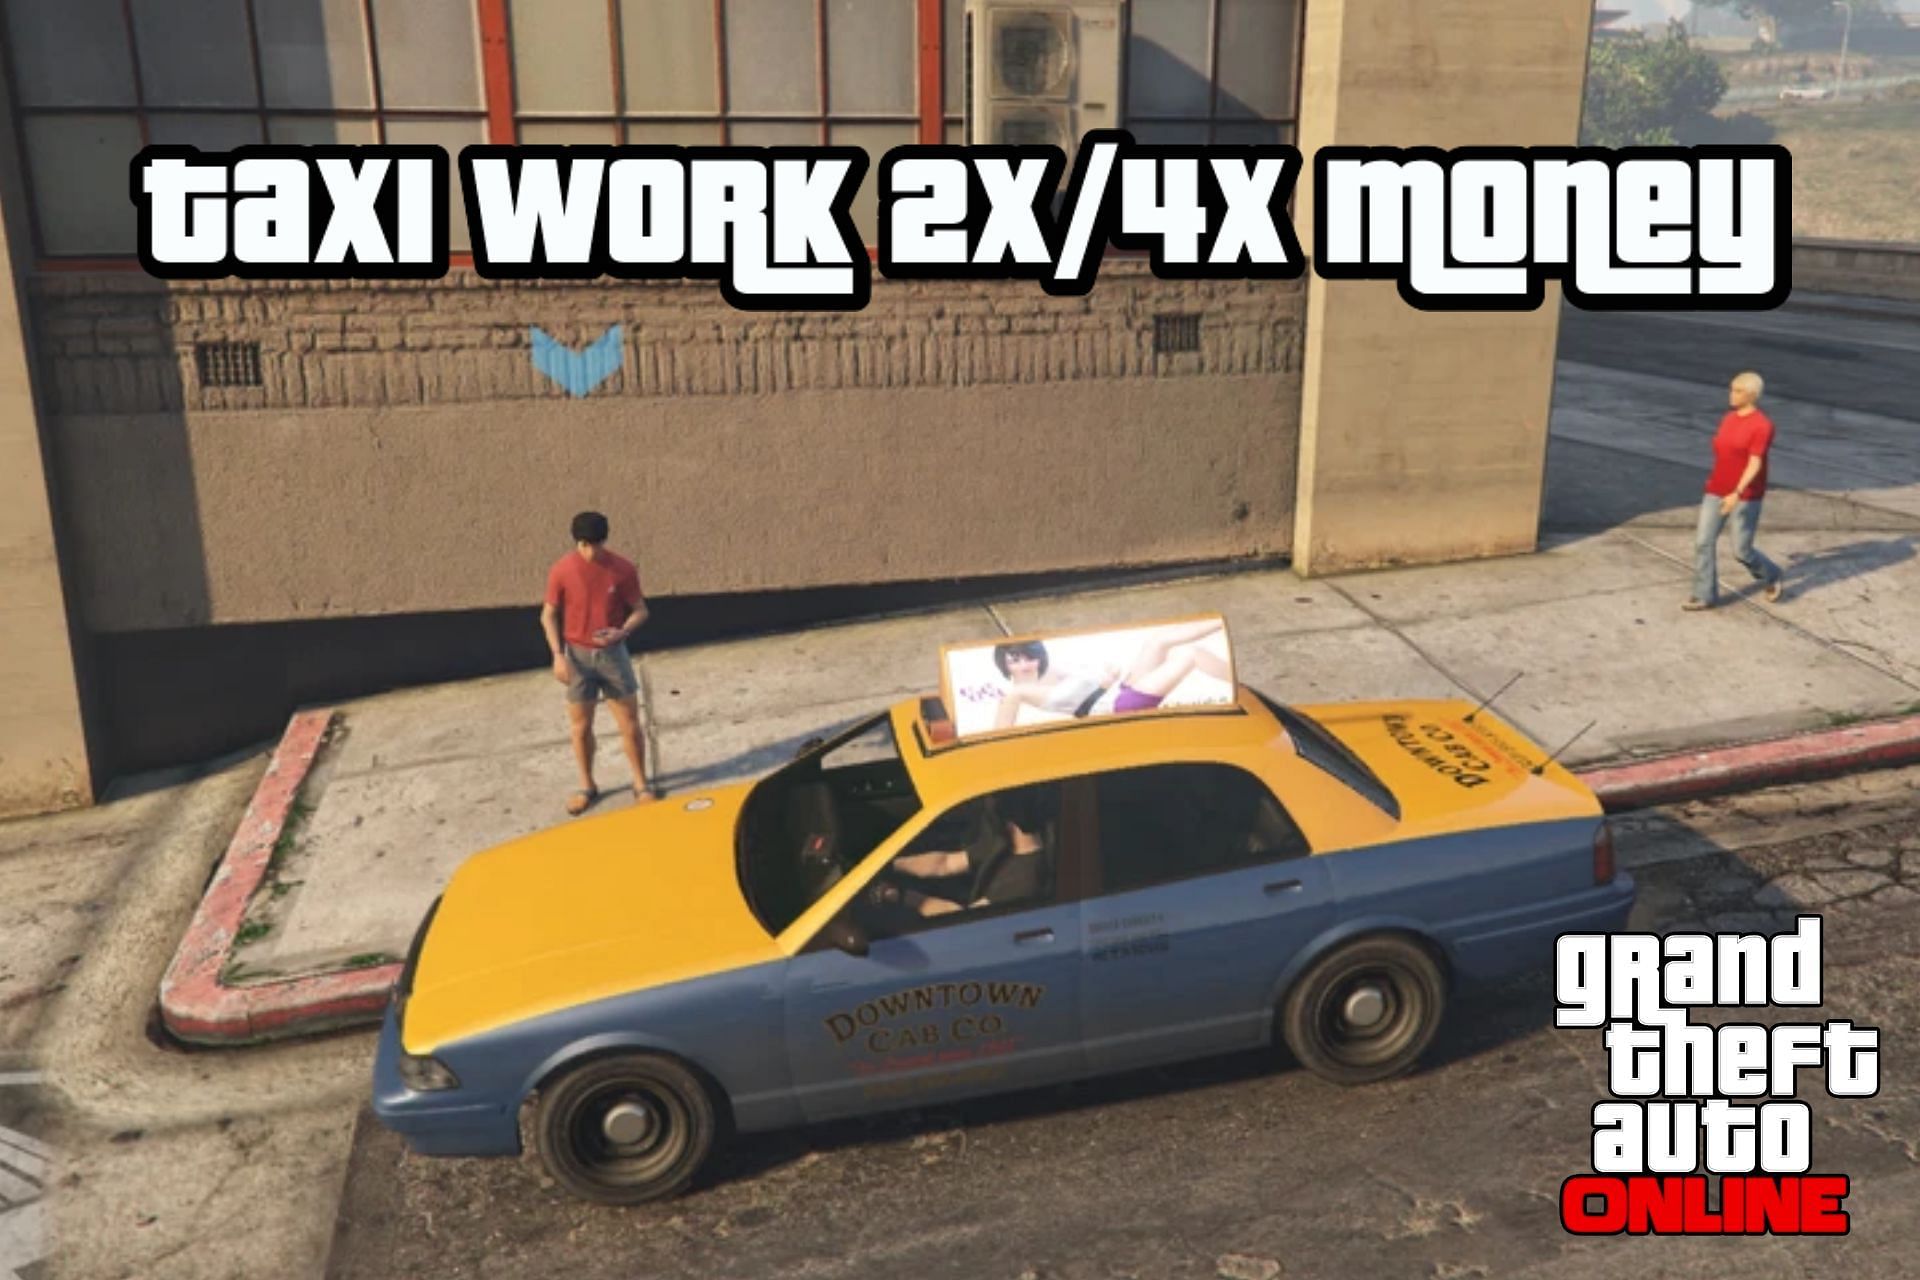 Taxi Work missions are paying increased amounts in GTA Online this week (Image via GTA Fandom)